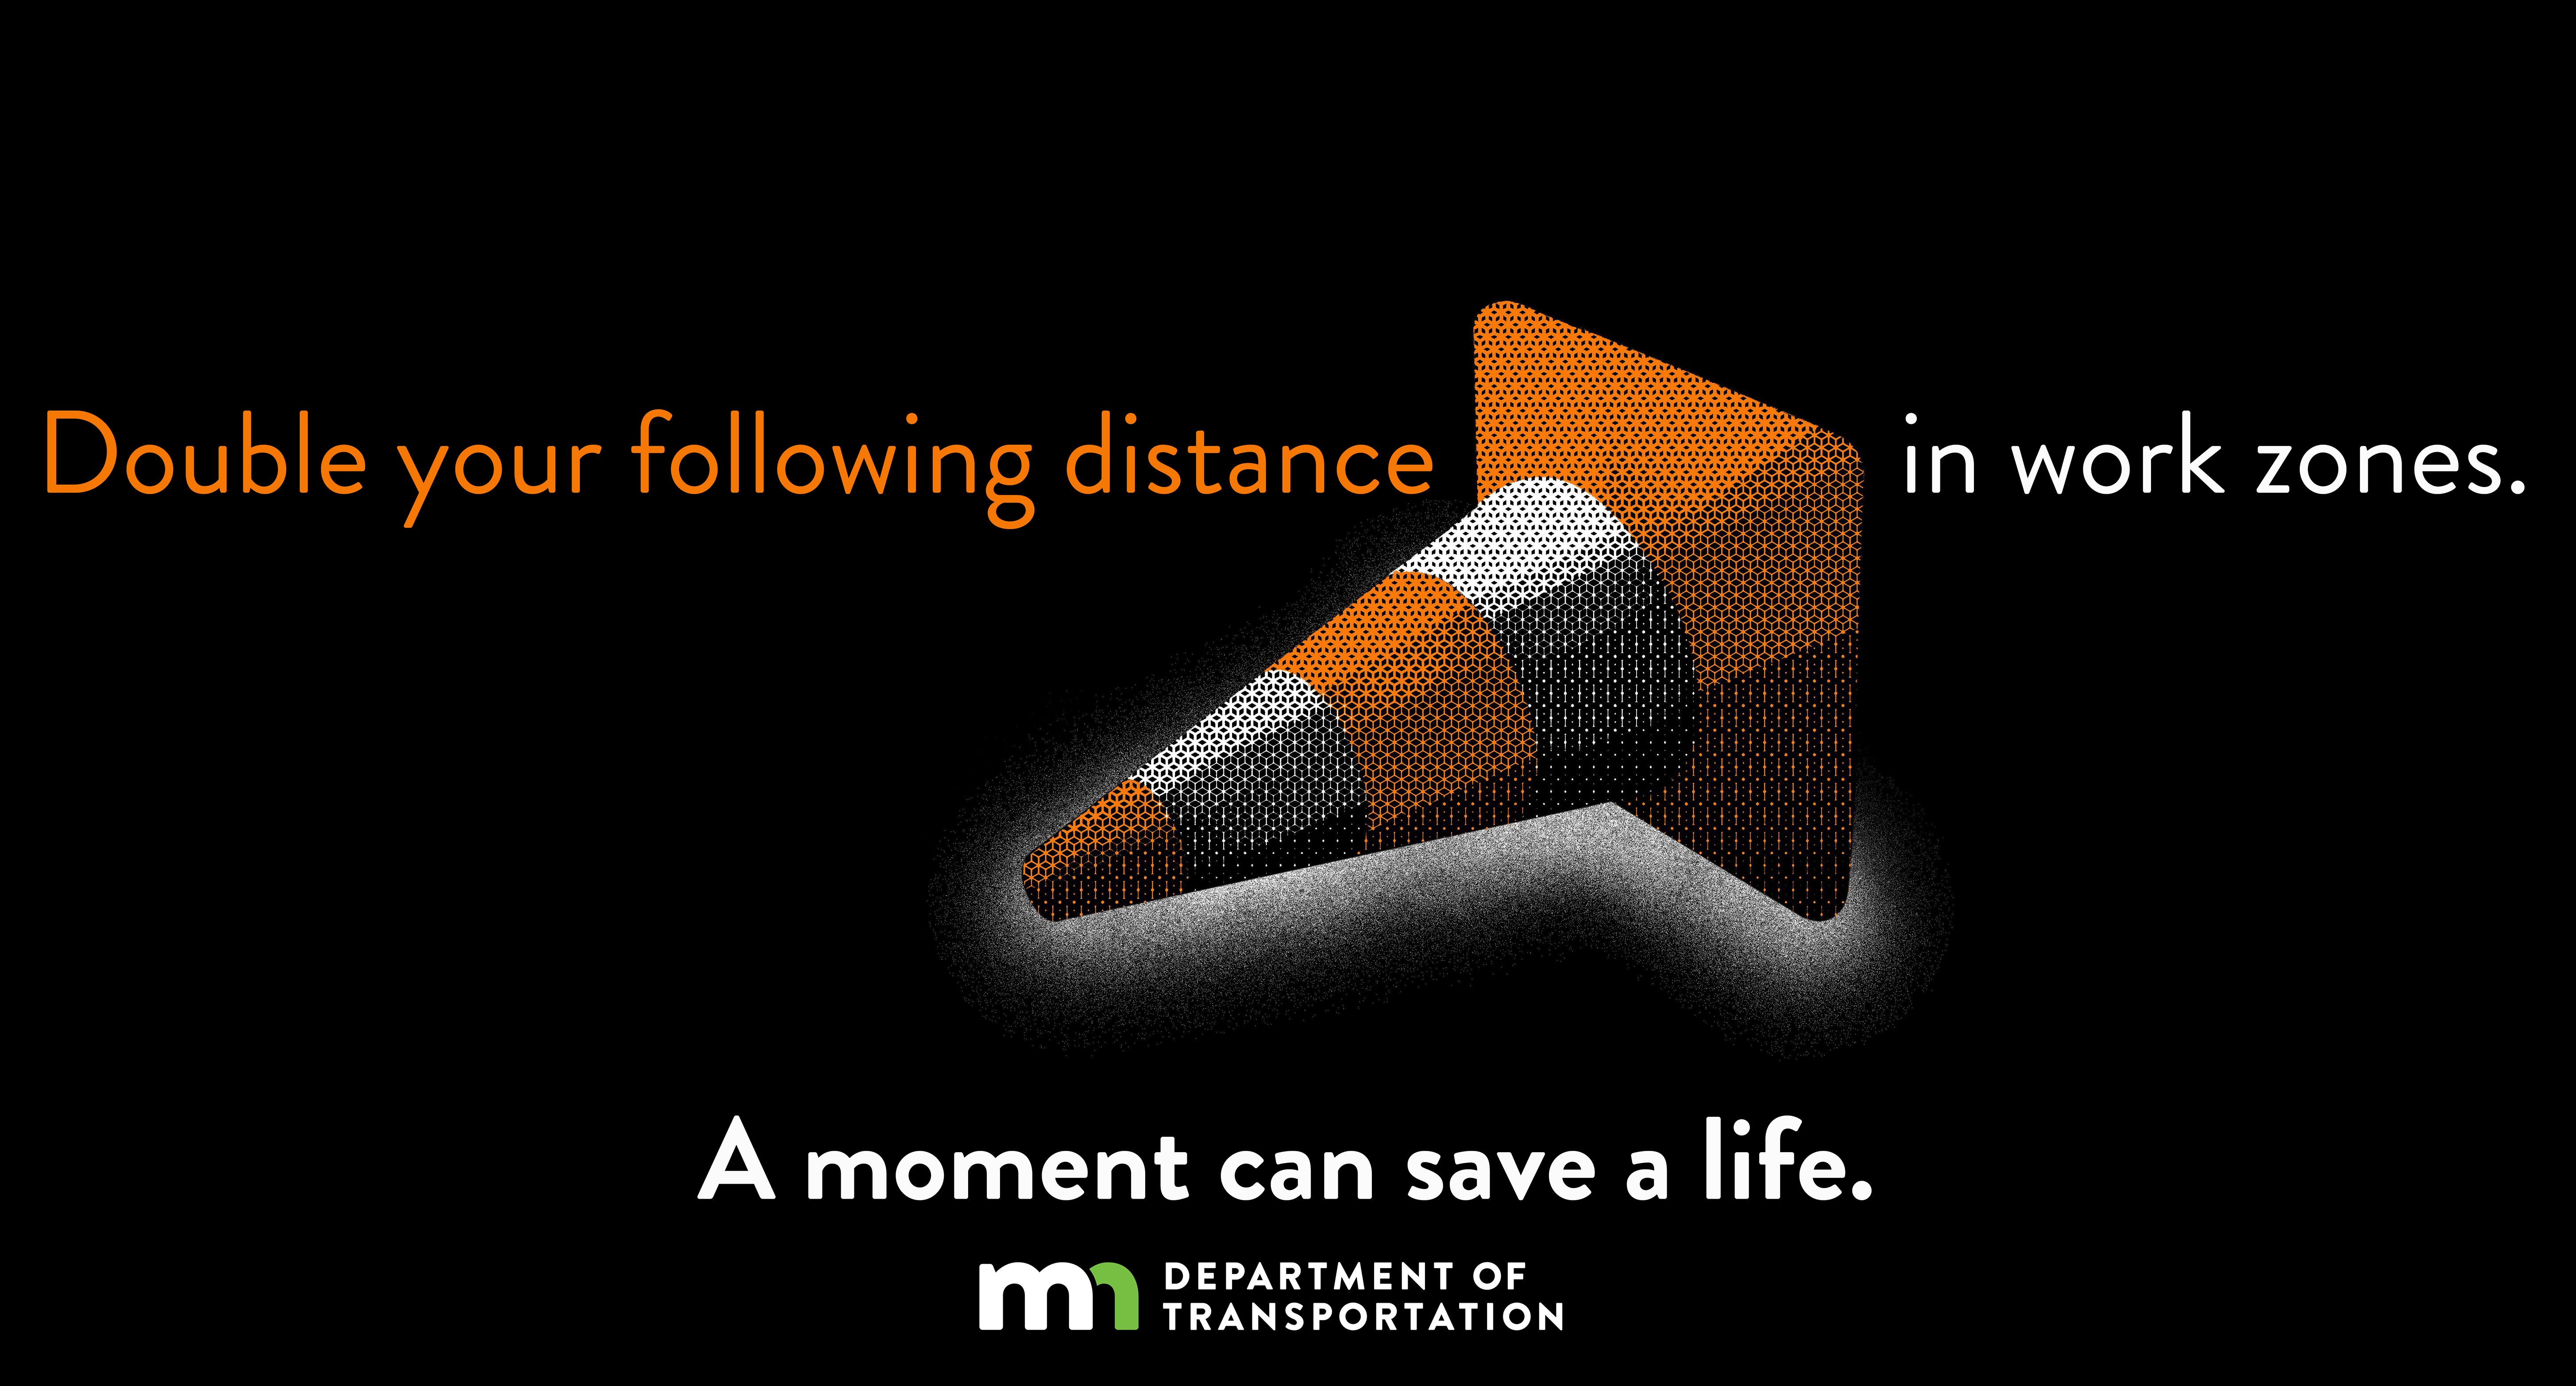 Double your distance in work zones. A moment can save a life.